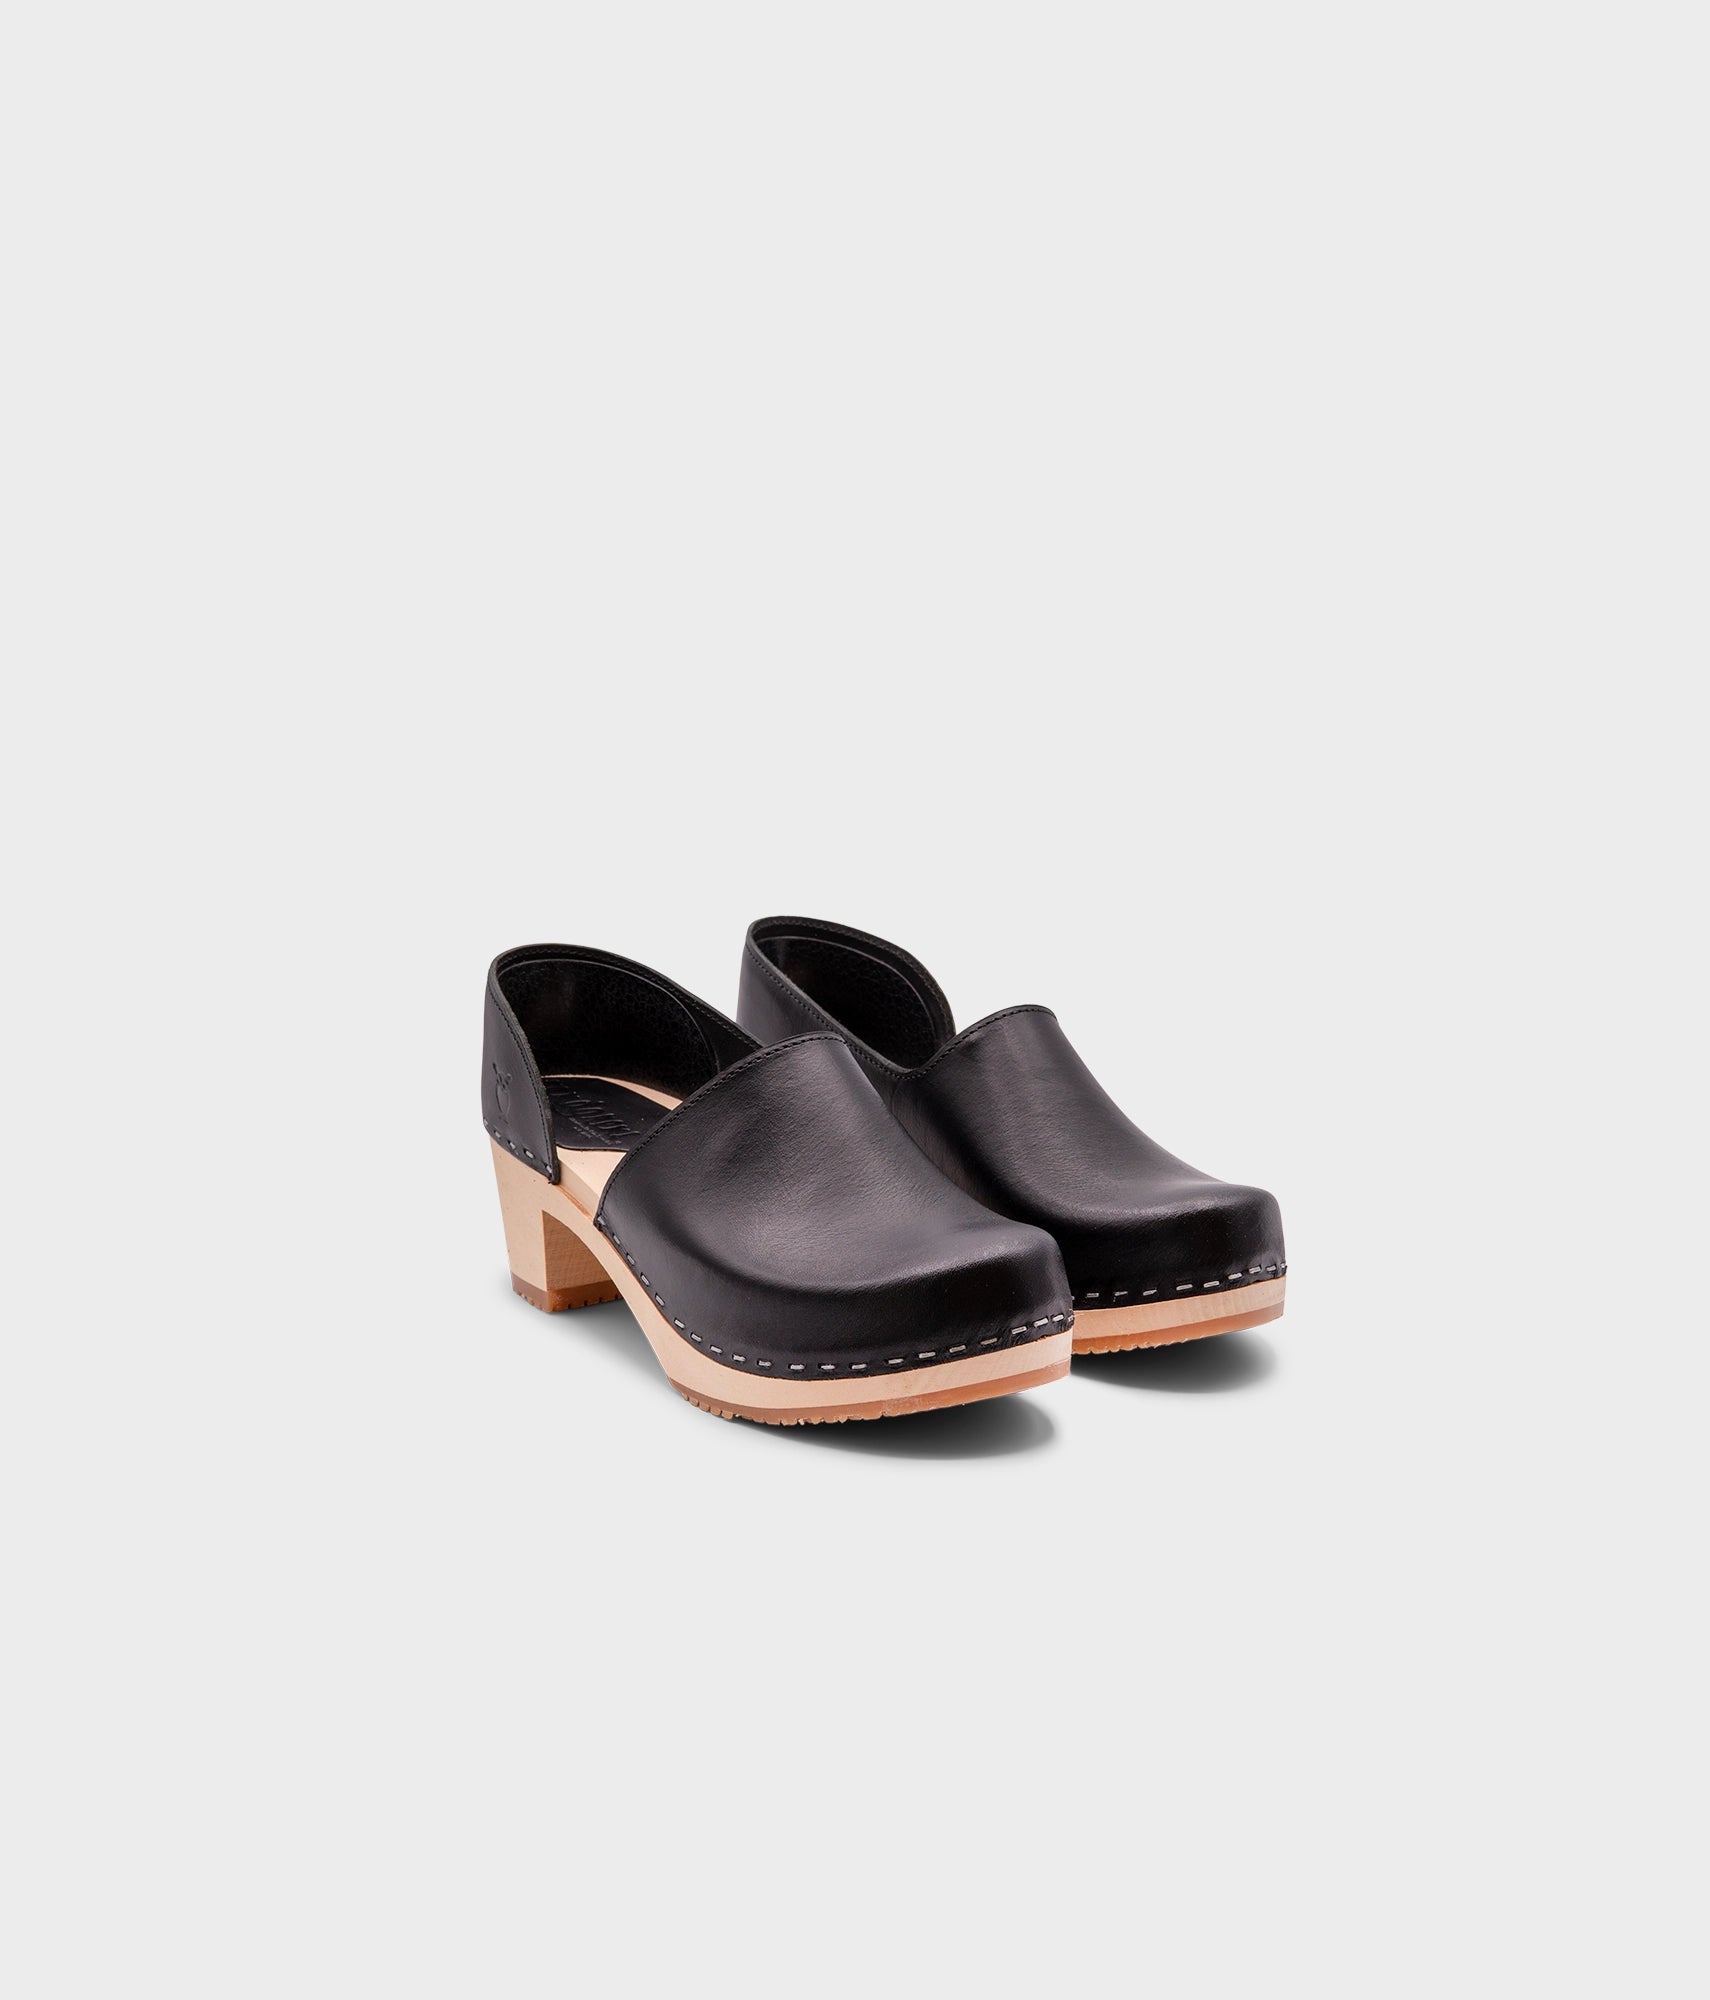 high heeled closed-back clogs in black vegetable tanned leather stapled on a light wooden base